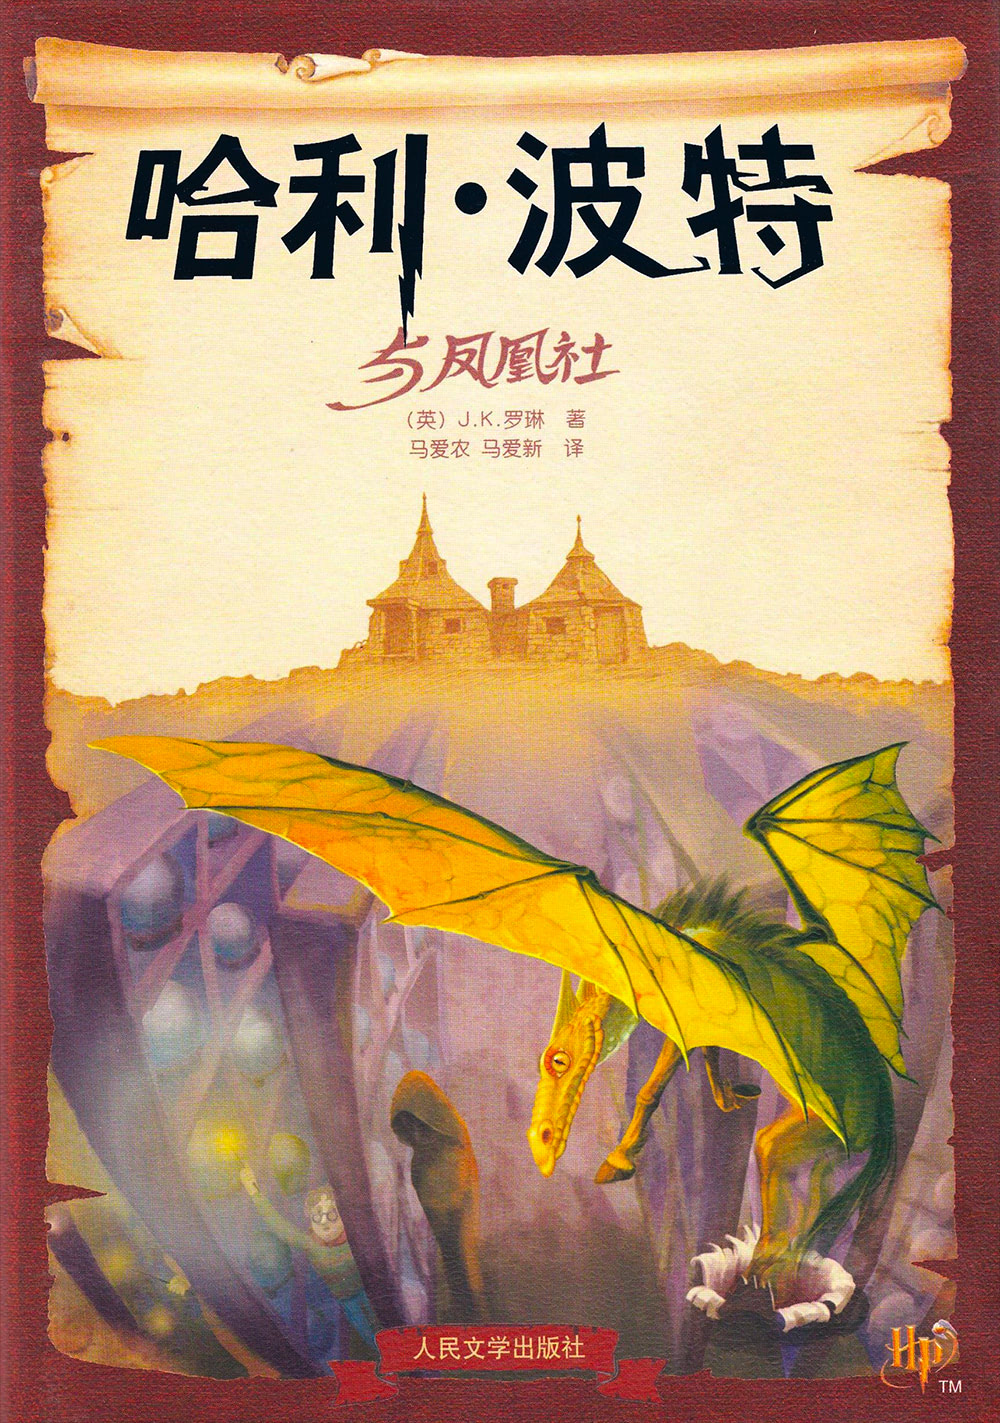 ‘Order of the Phoenix’ (China)